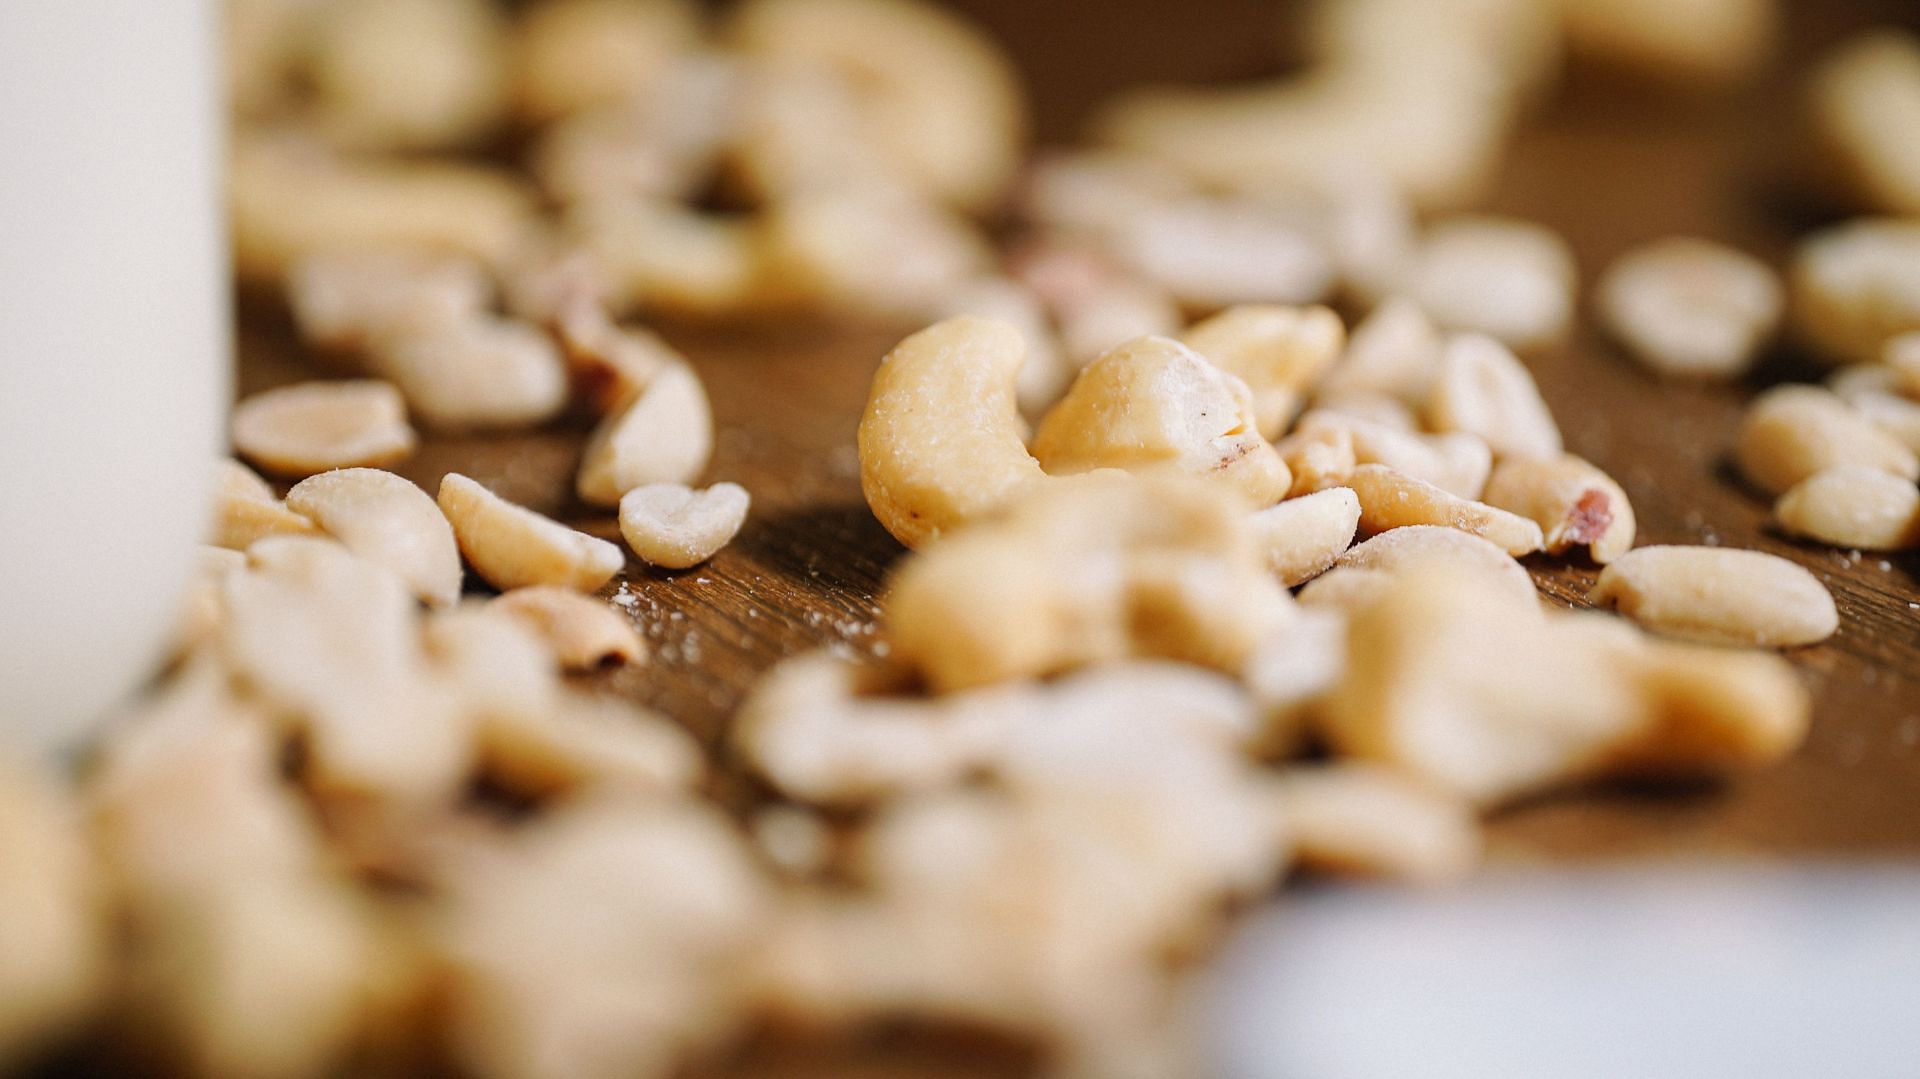 You can include peanuts as snack or in the form of butter in your diet. (Image via Unsplash/ Felipepelaquim)